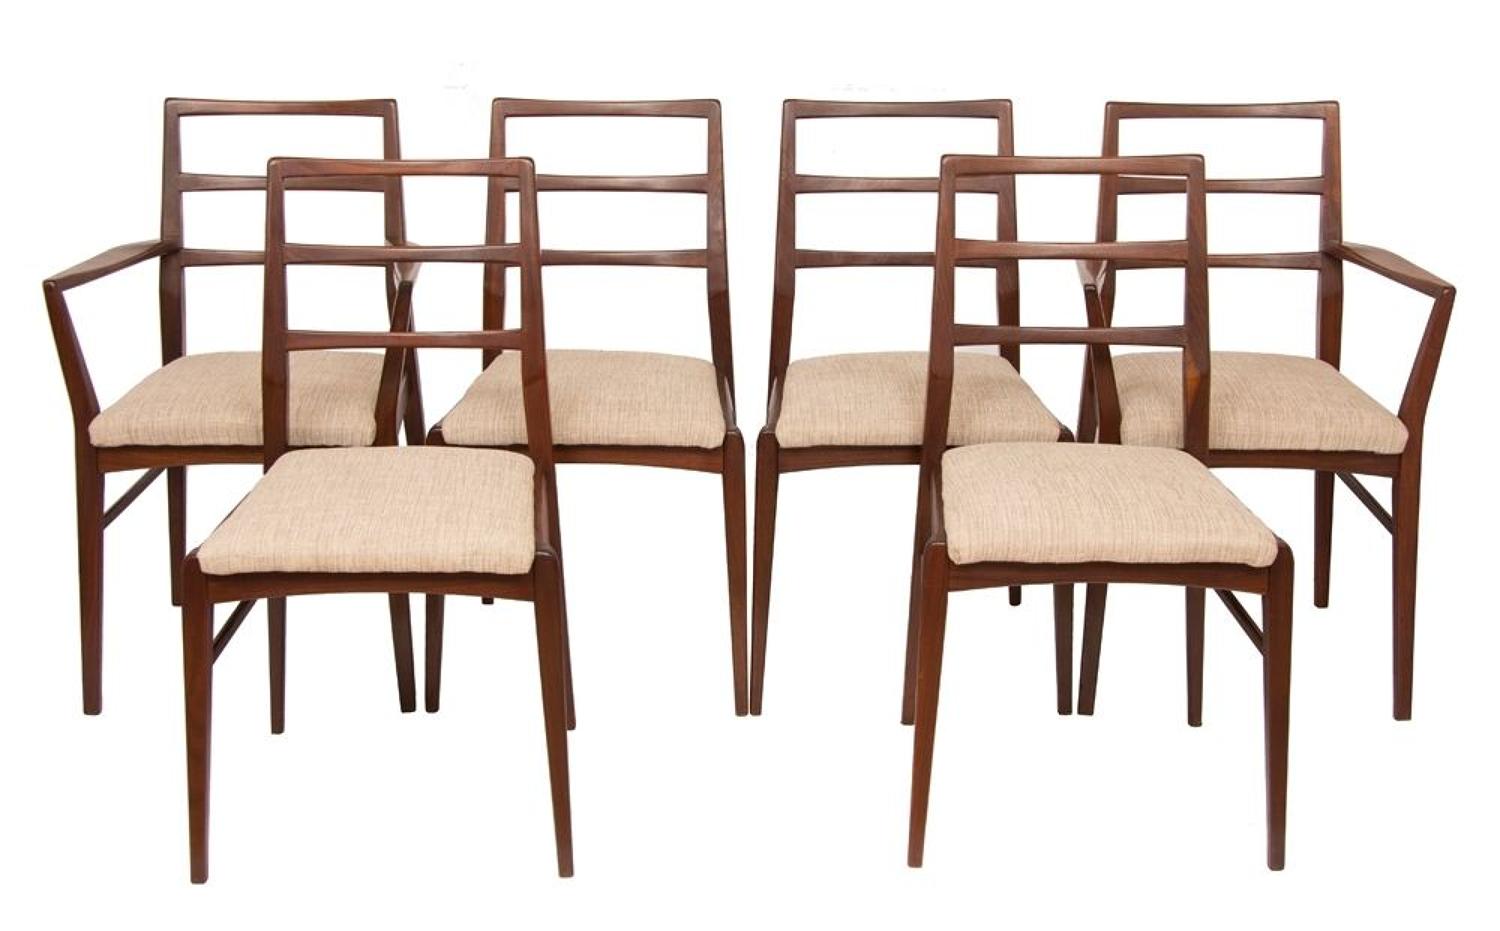 Set of 6 Ladder Back Dining Chairs c.1970